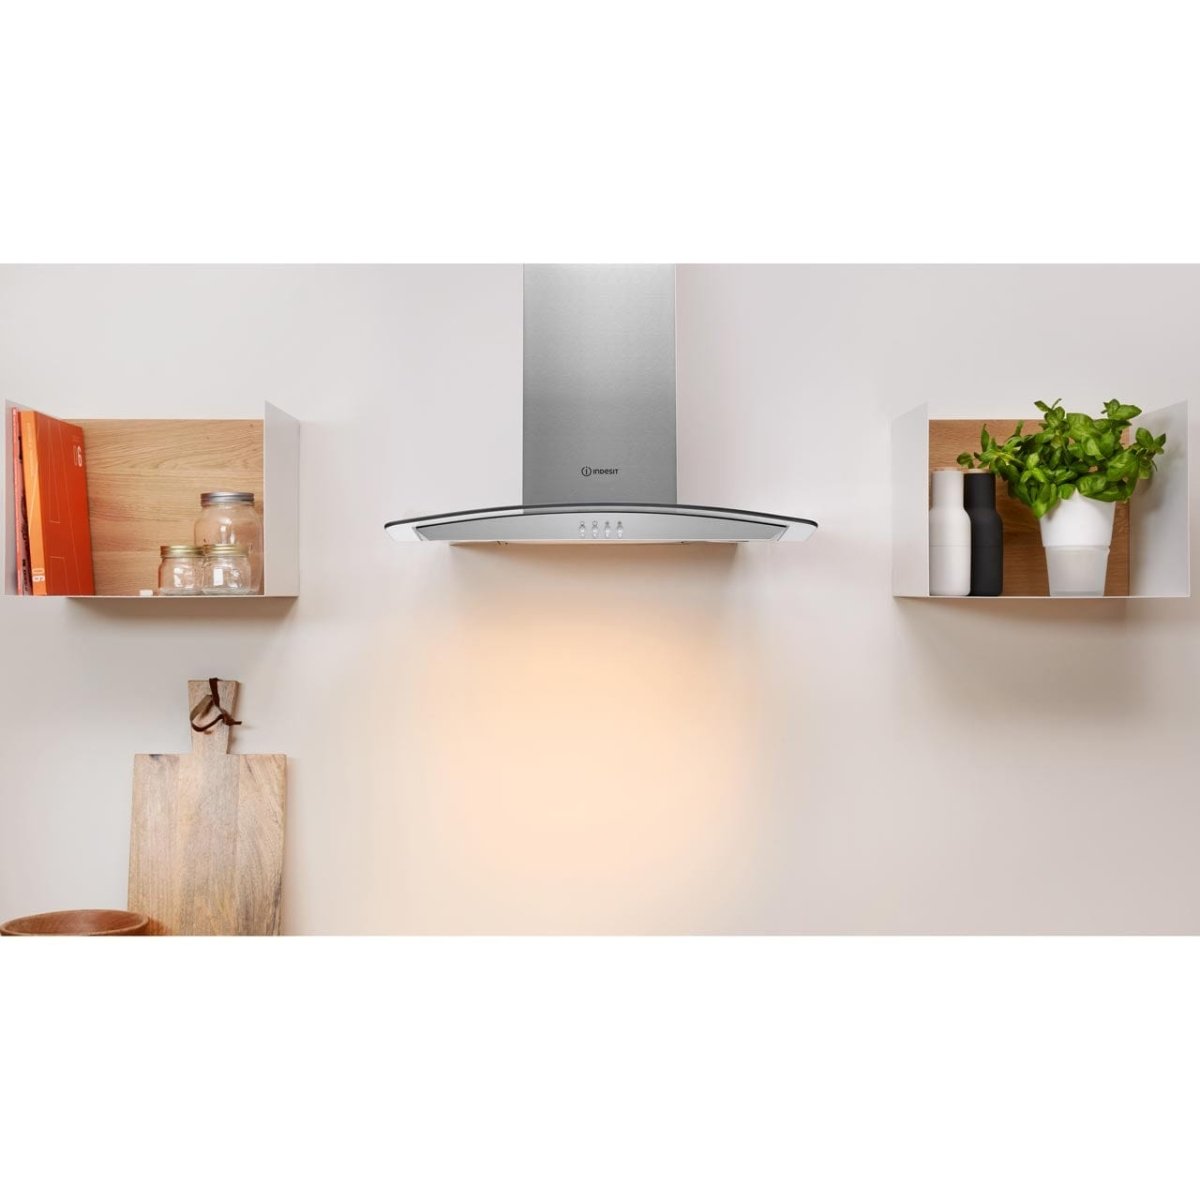 INDESIT IHGC65LMX 60cm Cooker Hood With Curved Glass Canopy - Stainless Steel | Atlantic Electrics